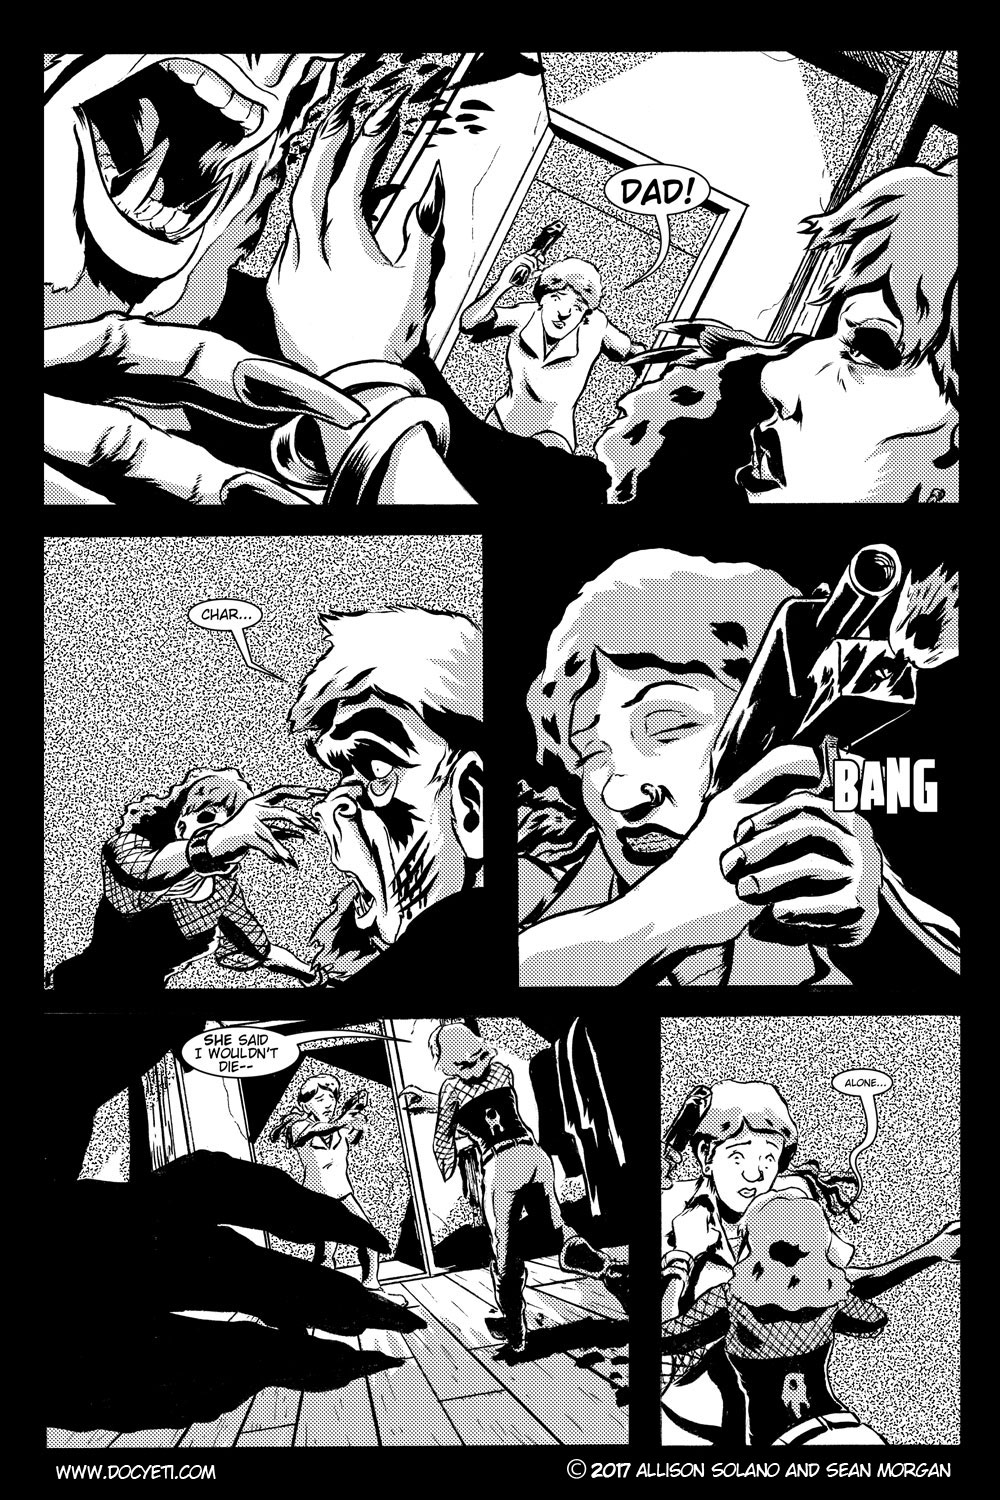 This Yeti for Hire! or the Yeti with the Lace Kerchief! Issue 3 pg.21